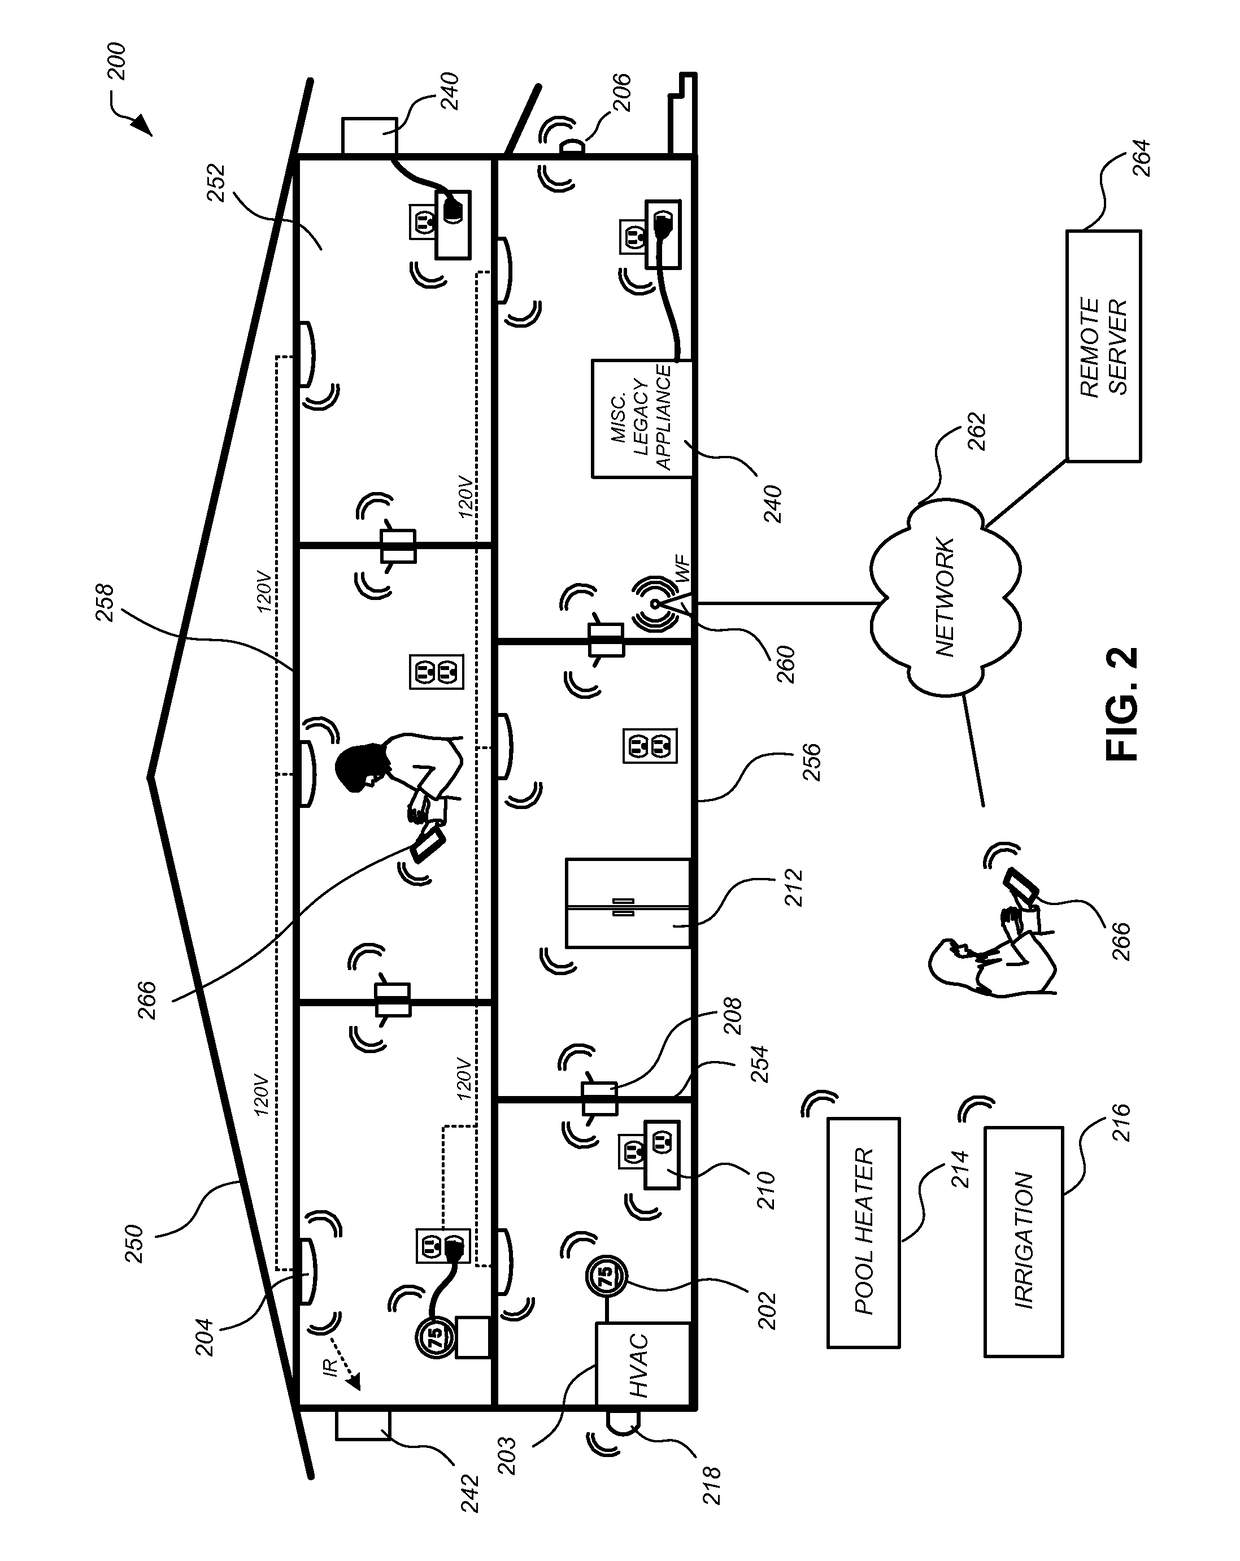 Controlling an HVAC system in association with a demand-response event with an intelligent network-connected thermostat